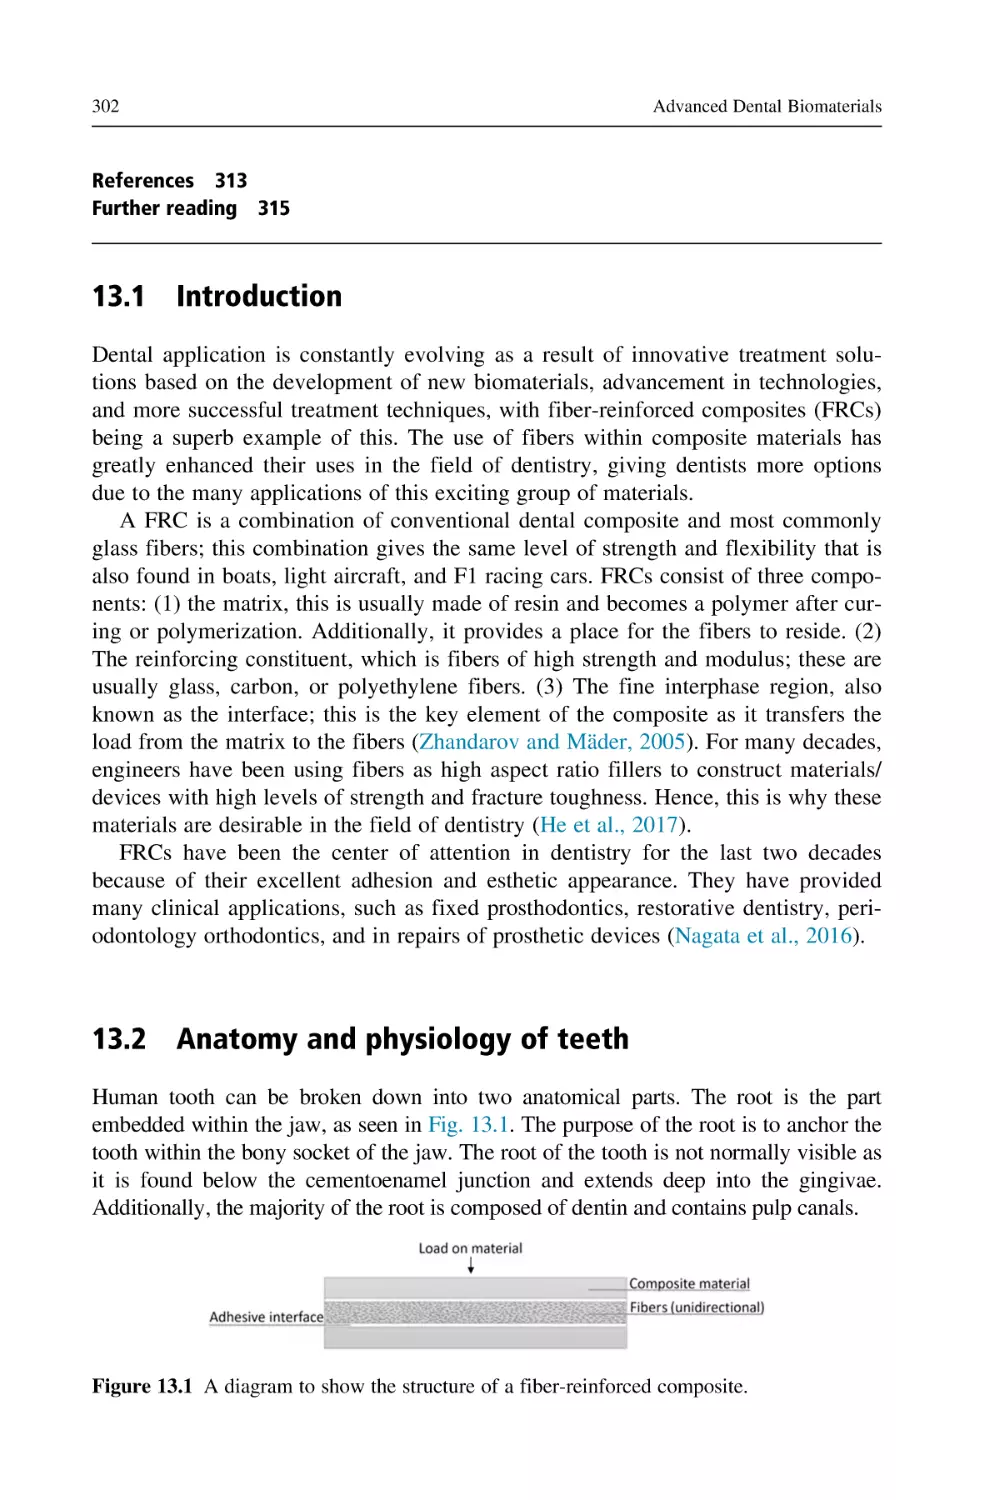 13.1 Introduction
13.2 Anatomy and physiology of teeth